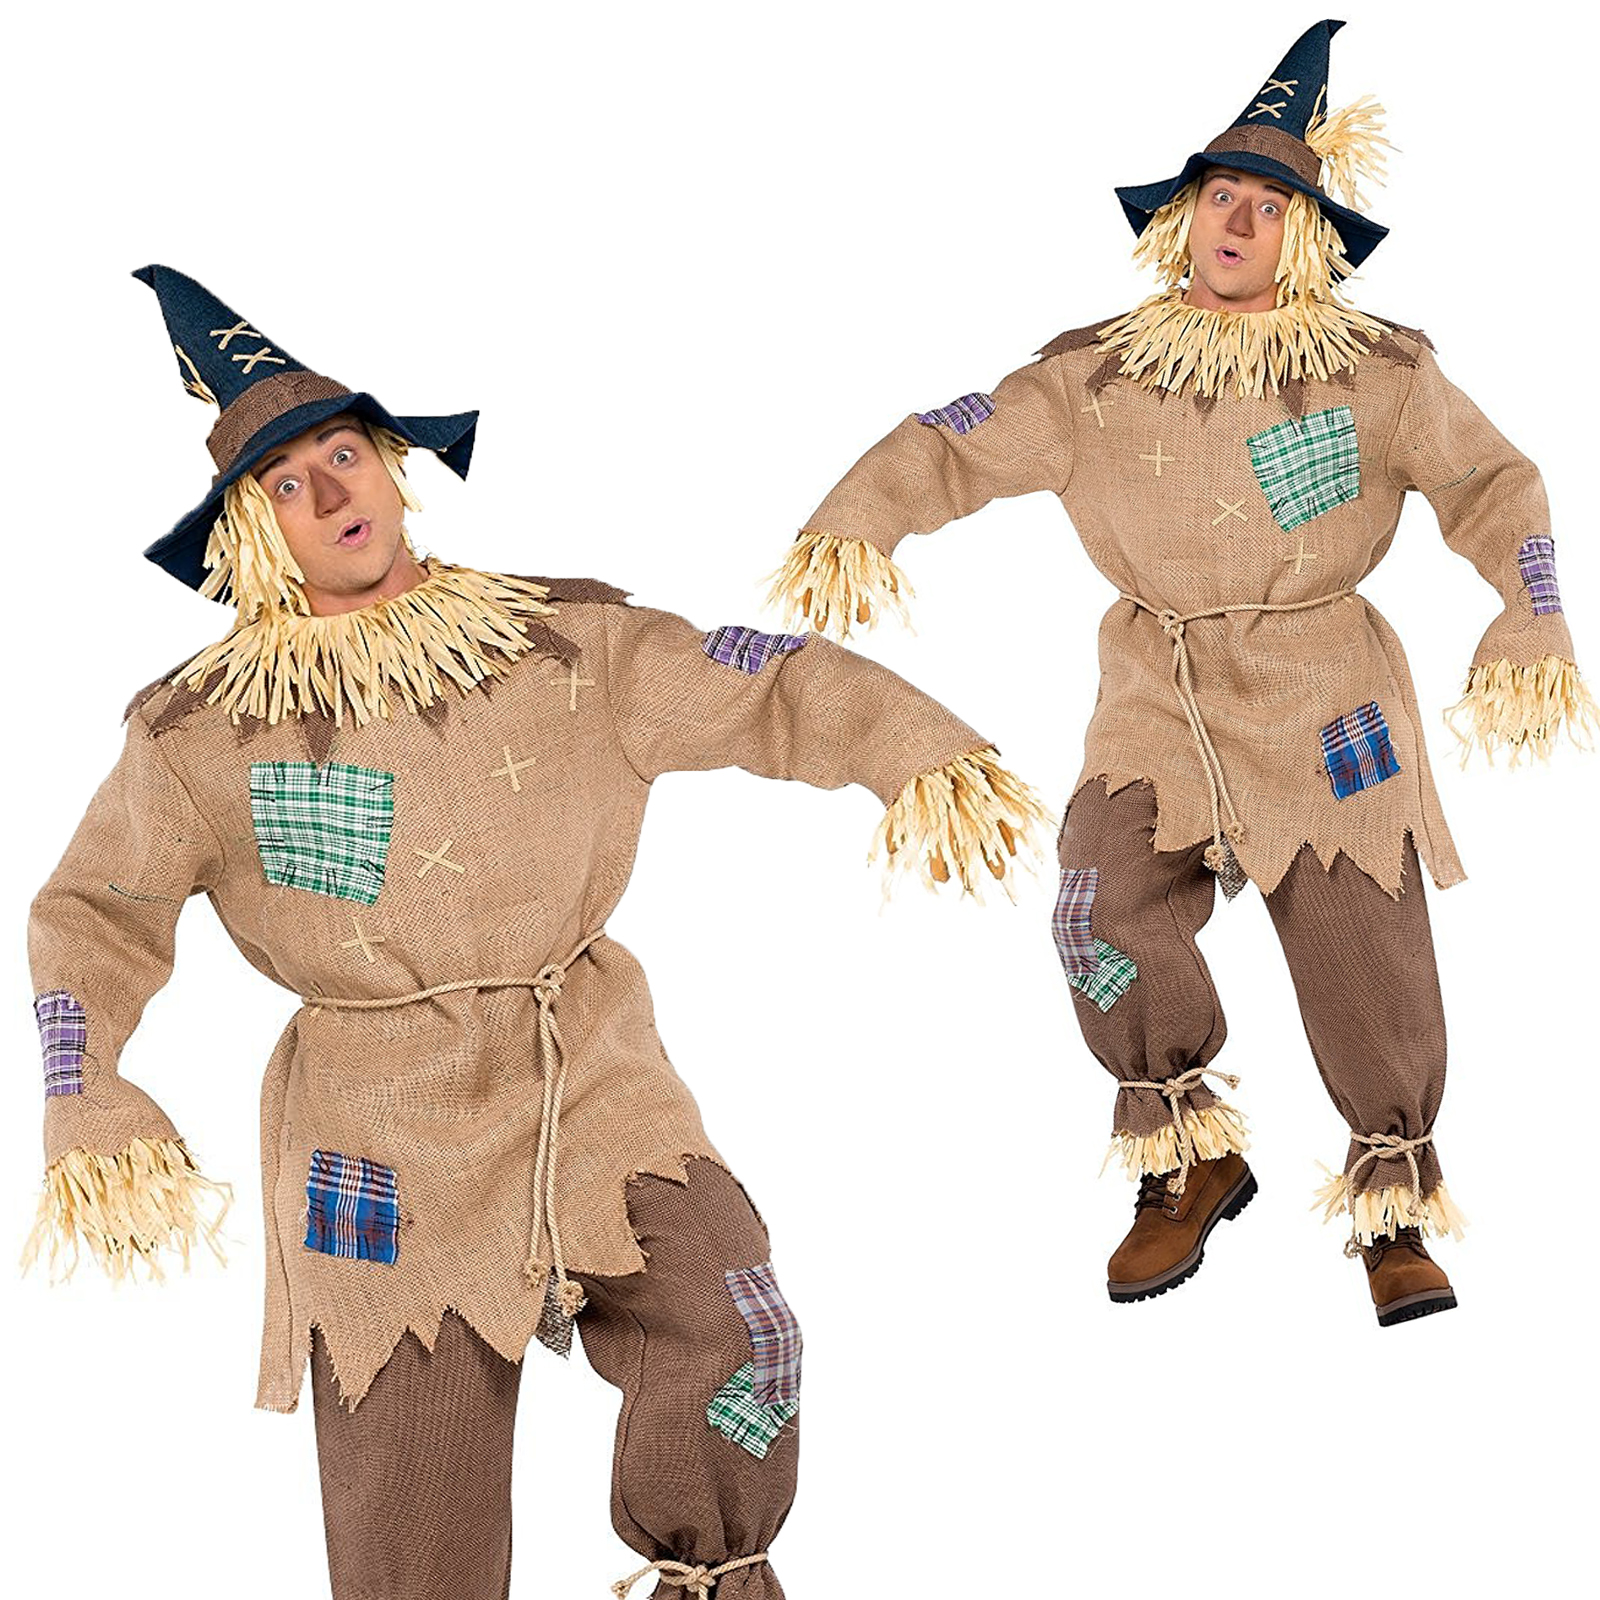 Little Girls Scarecrow Costume The Wizard Of Oz: Christys Dress Up Mens Mr Scarecrow...